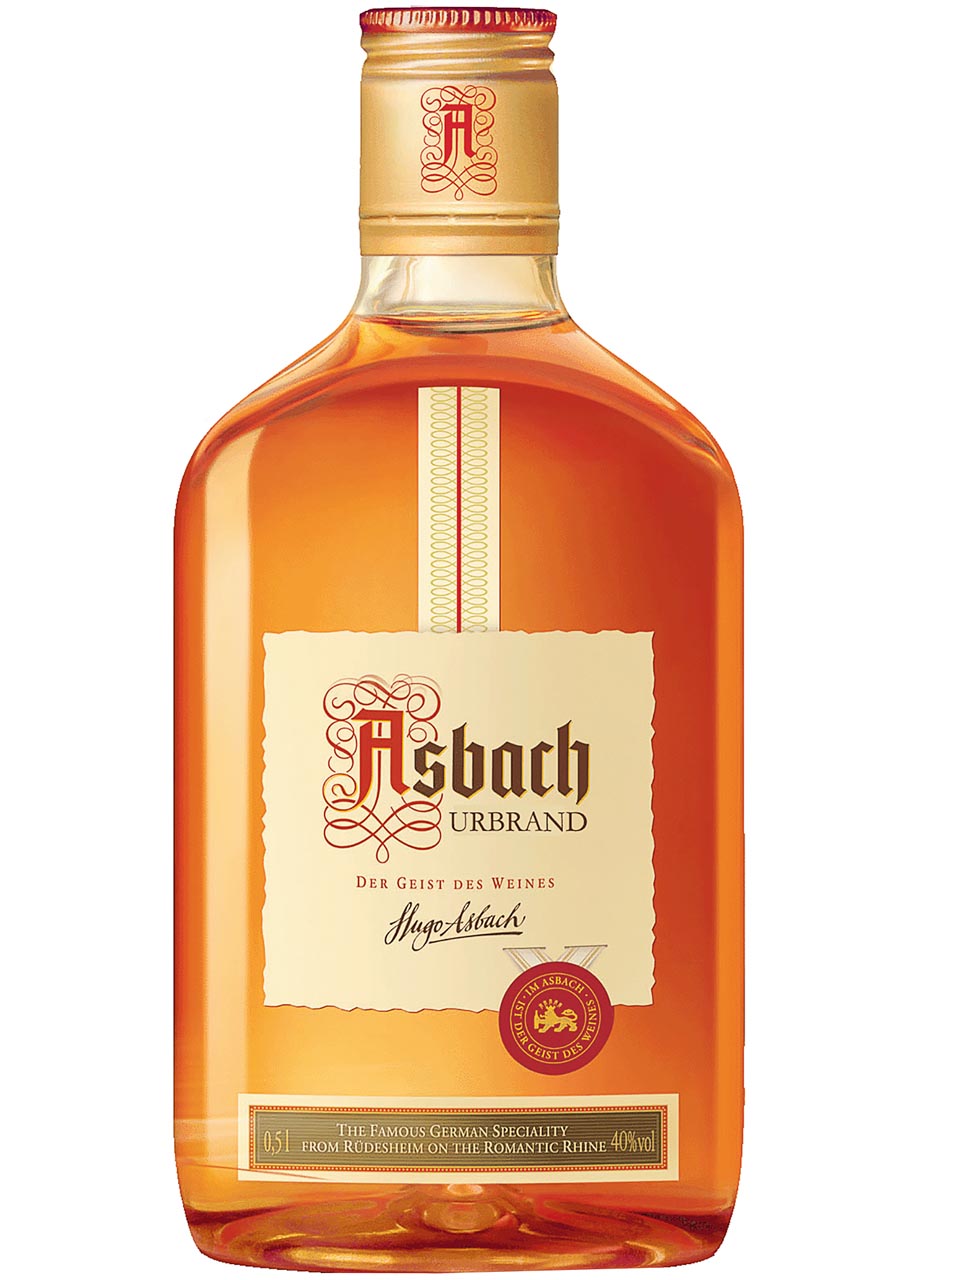 Asbach Urbrand 40% 0.5L PET null - onesize - 1